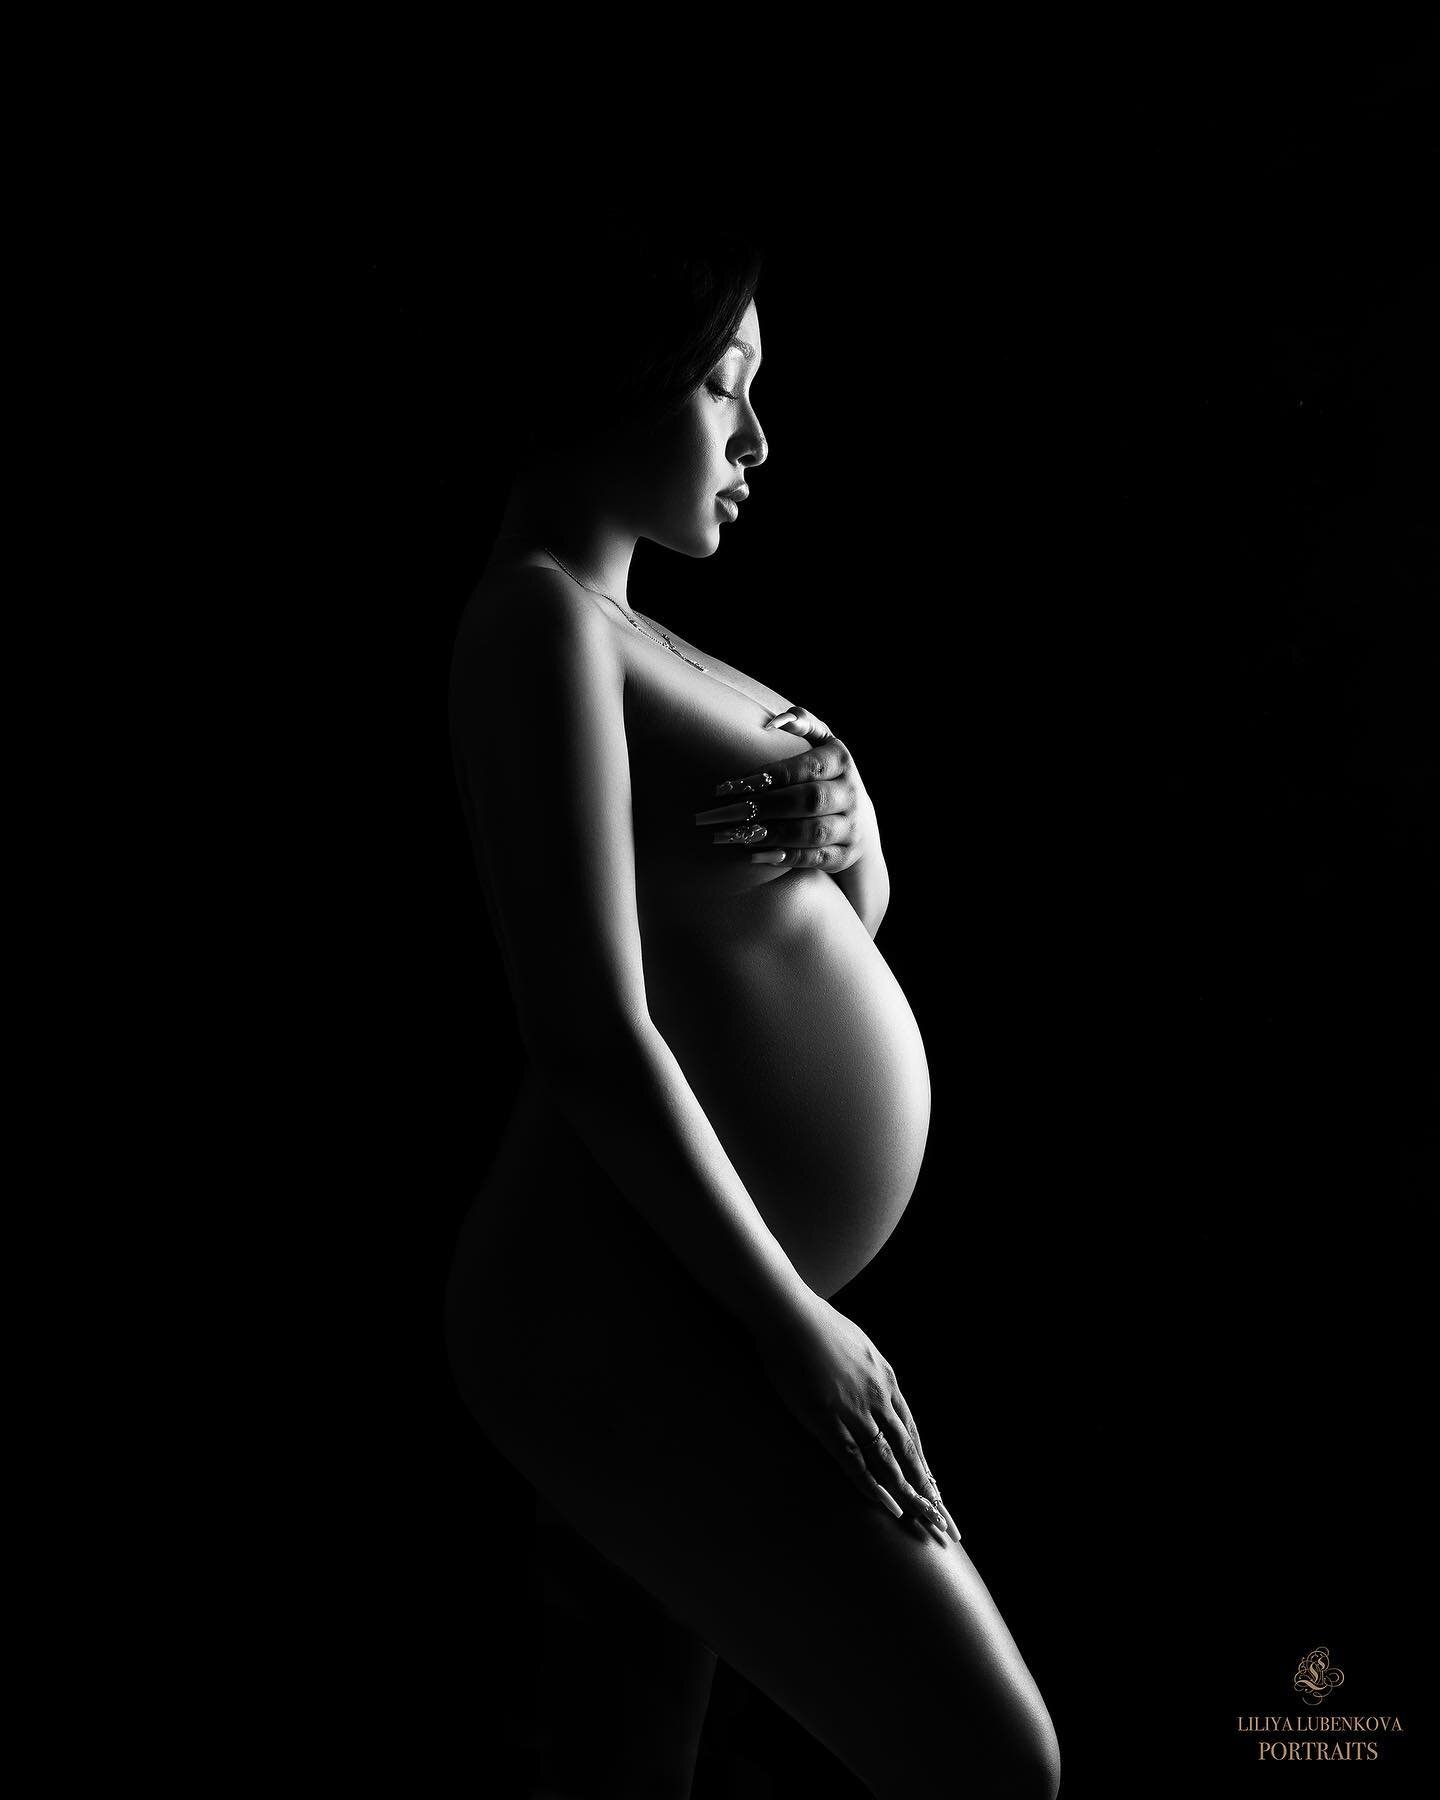 Love capturing silhouettes. They are just like a painting ❤️

#maternityphotography #pregnancyphotography #bnw #bnwphotography #vancouvermaternityphotographer #silhouettephotography